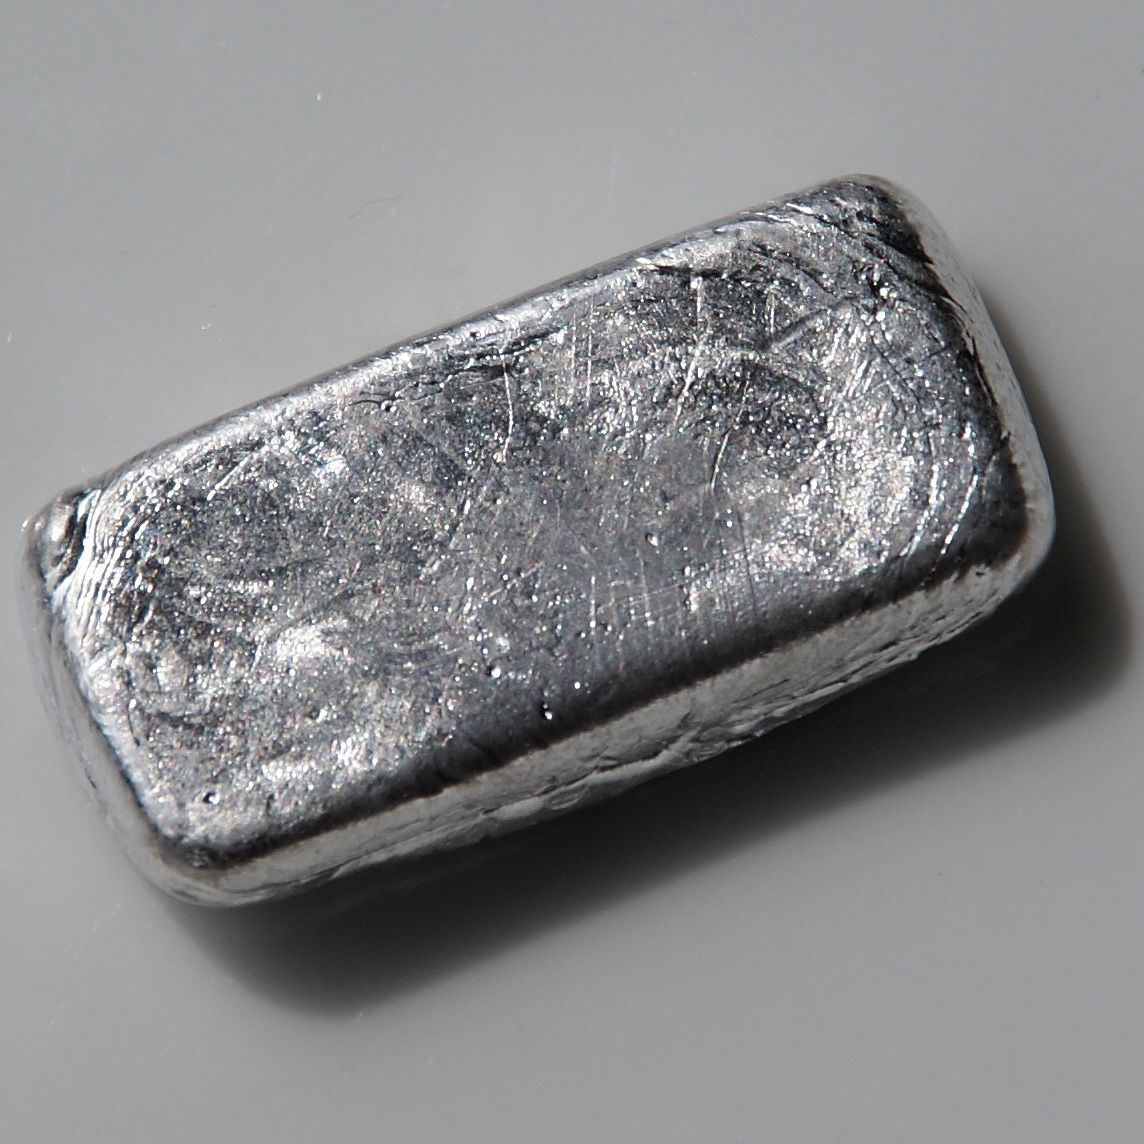 Facts About Indium Live Science